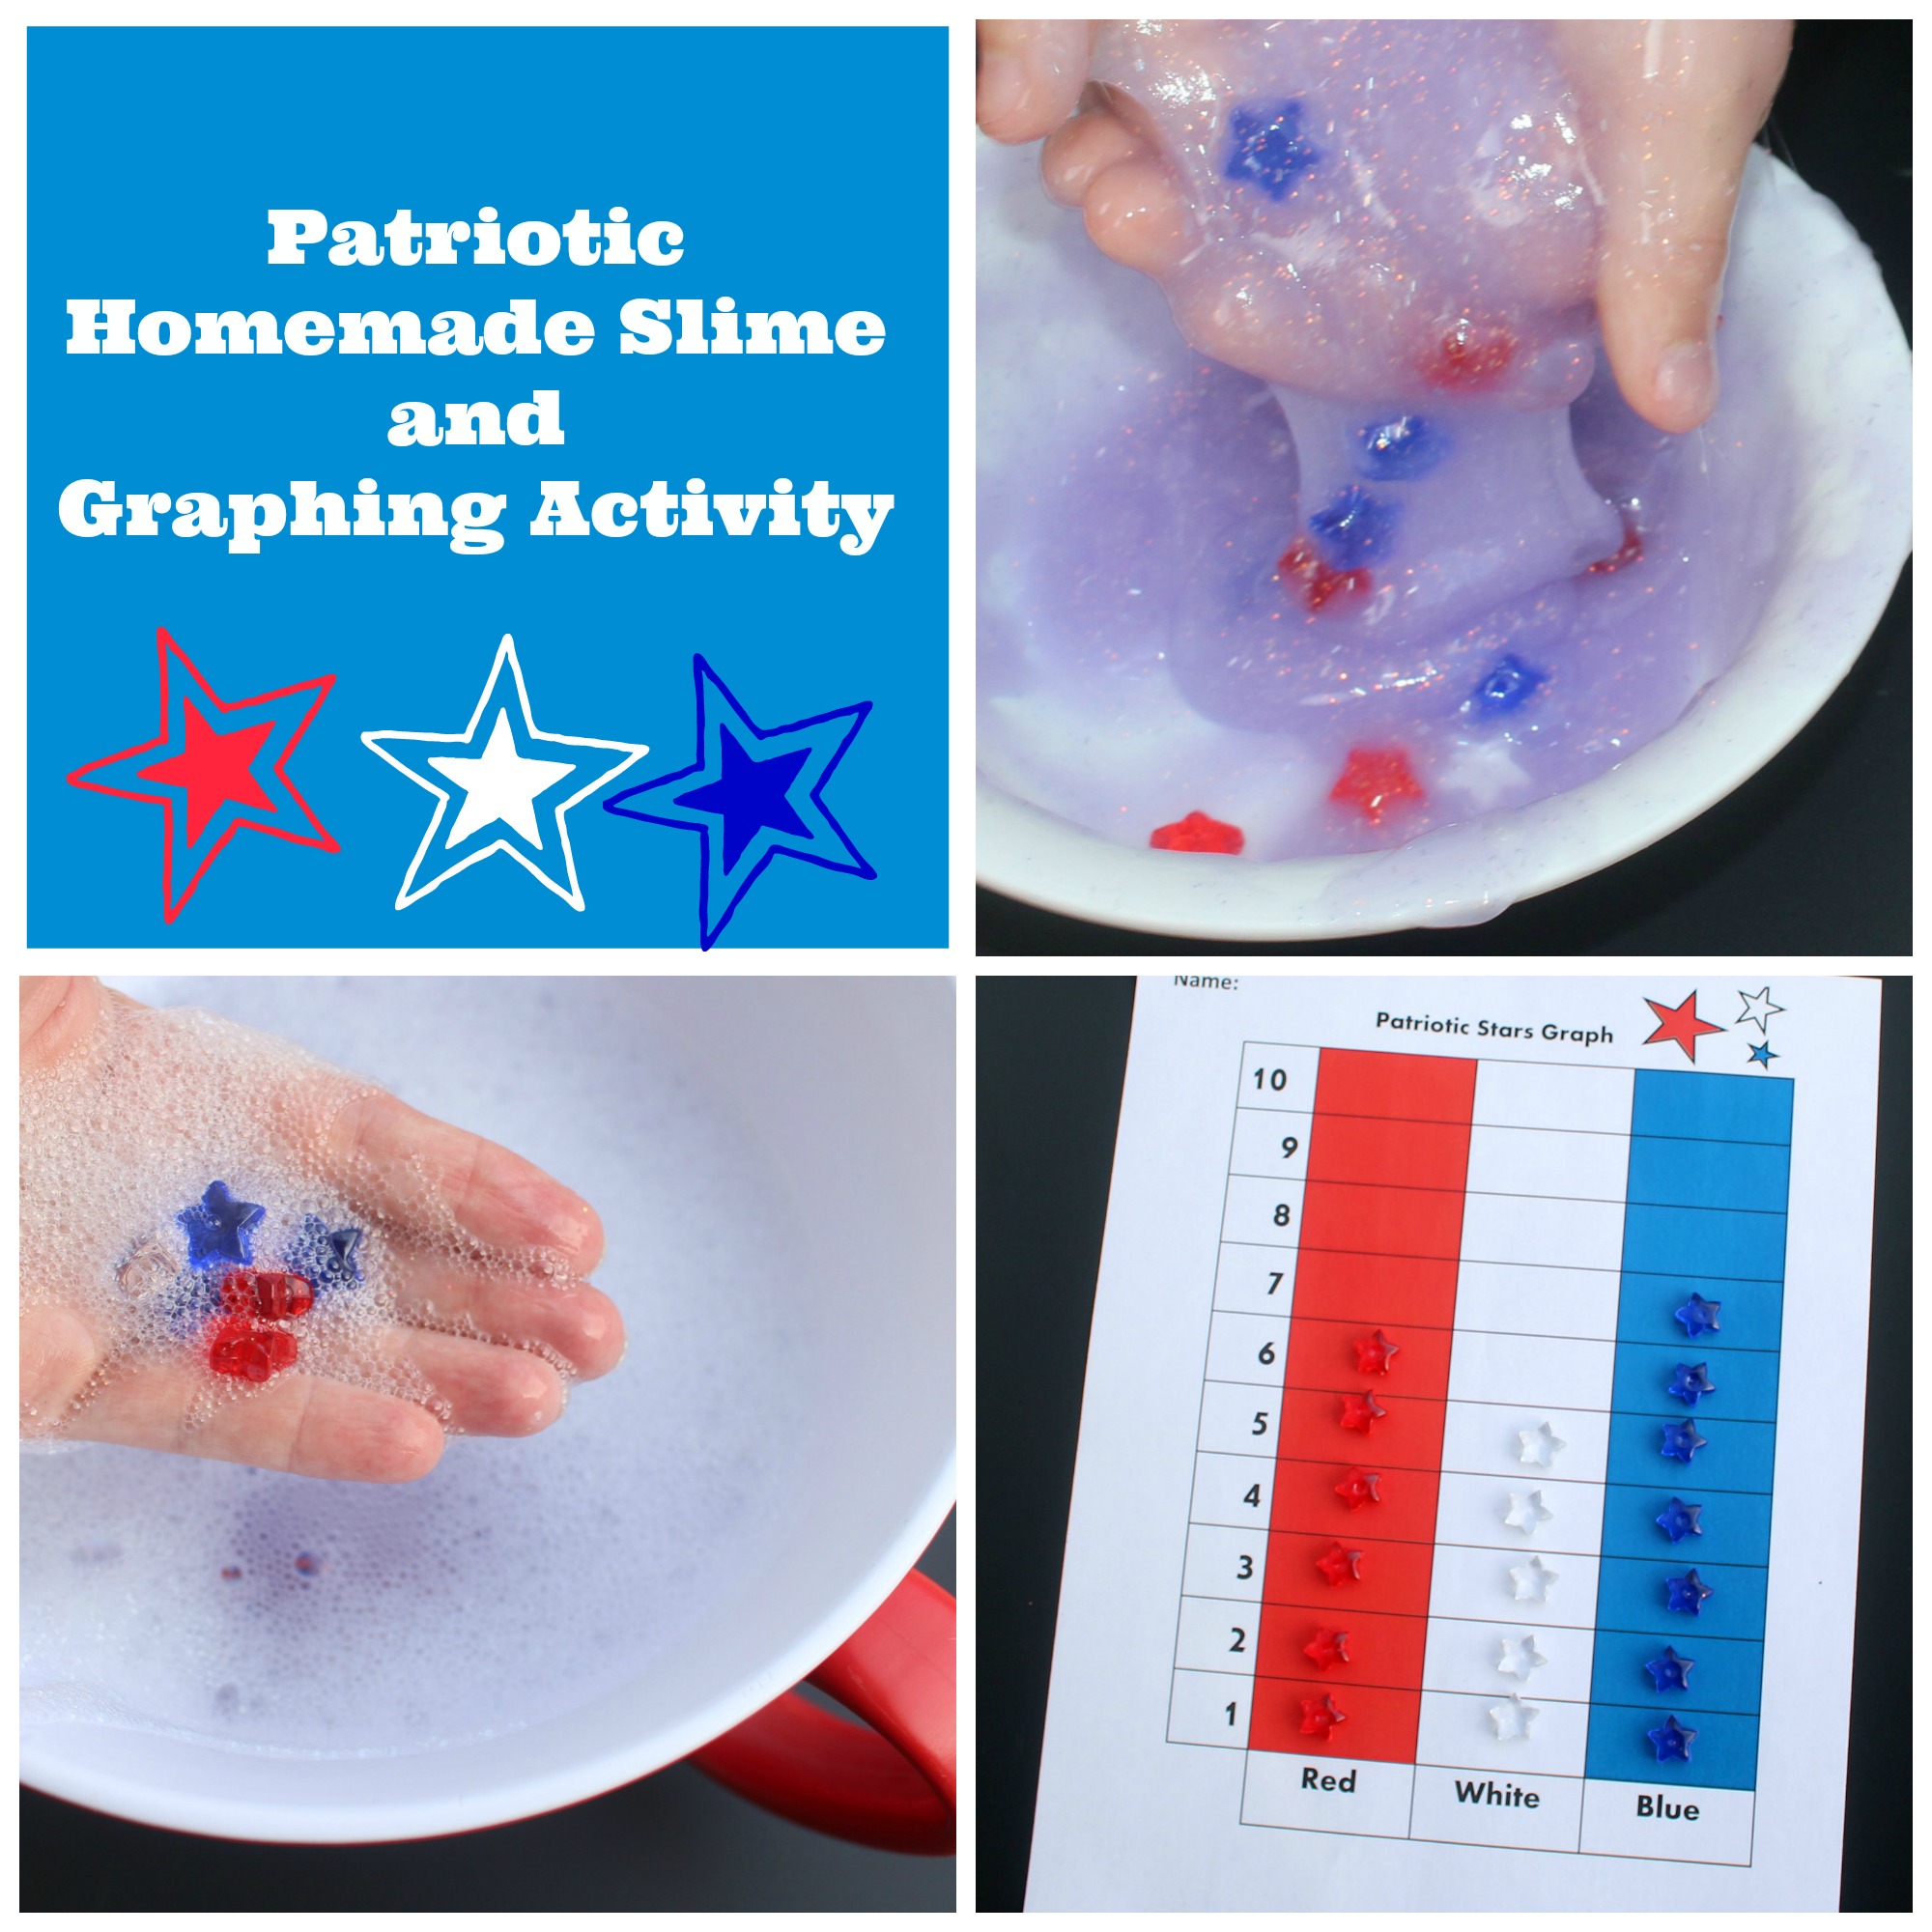 Patriotic Homemade Slime and Graphing Activity